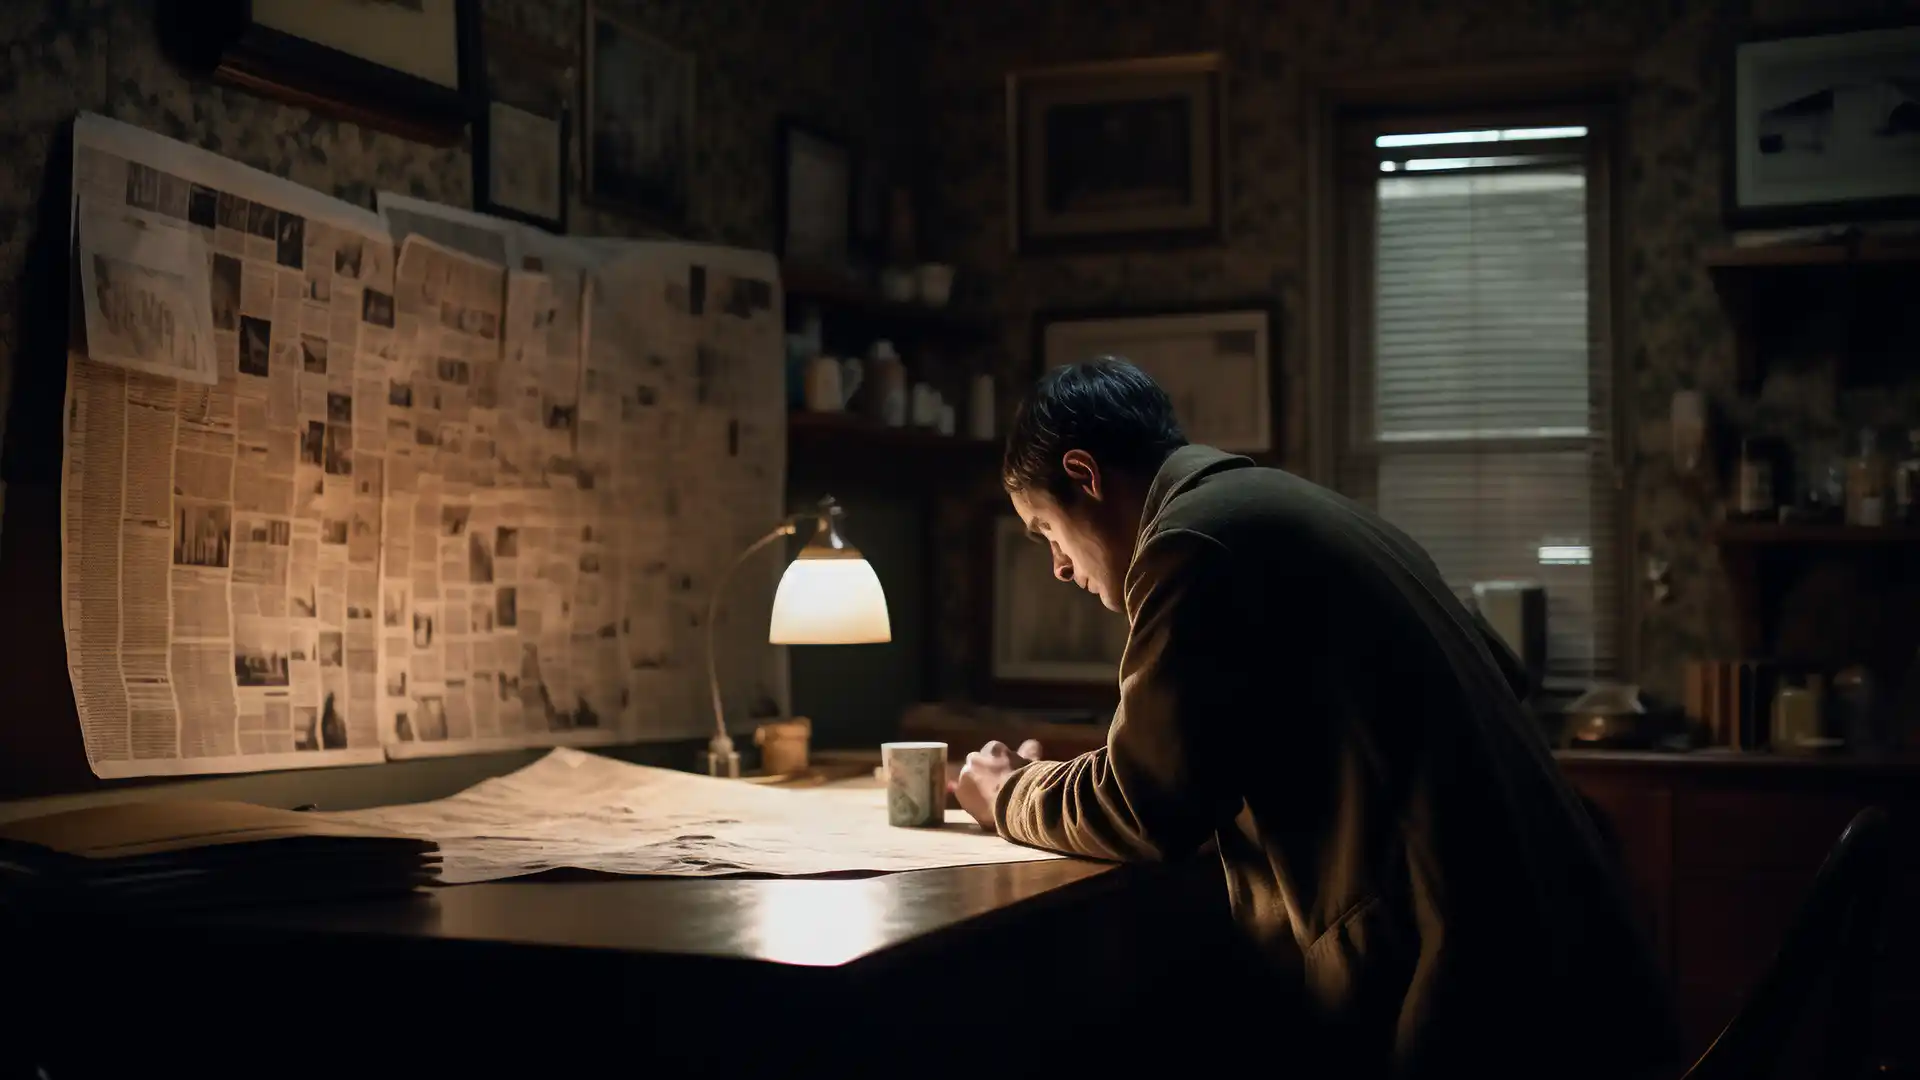 Person studying newspaper clippings related to victimless crimes in a dimly lit room